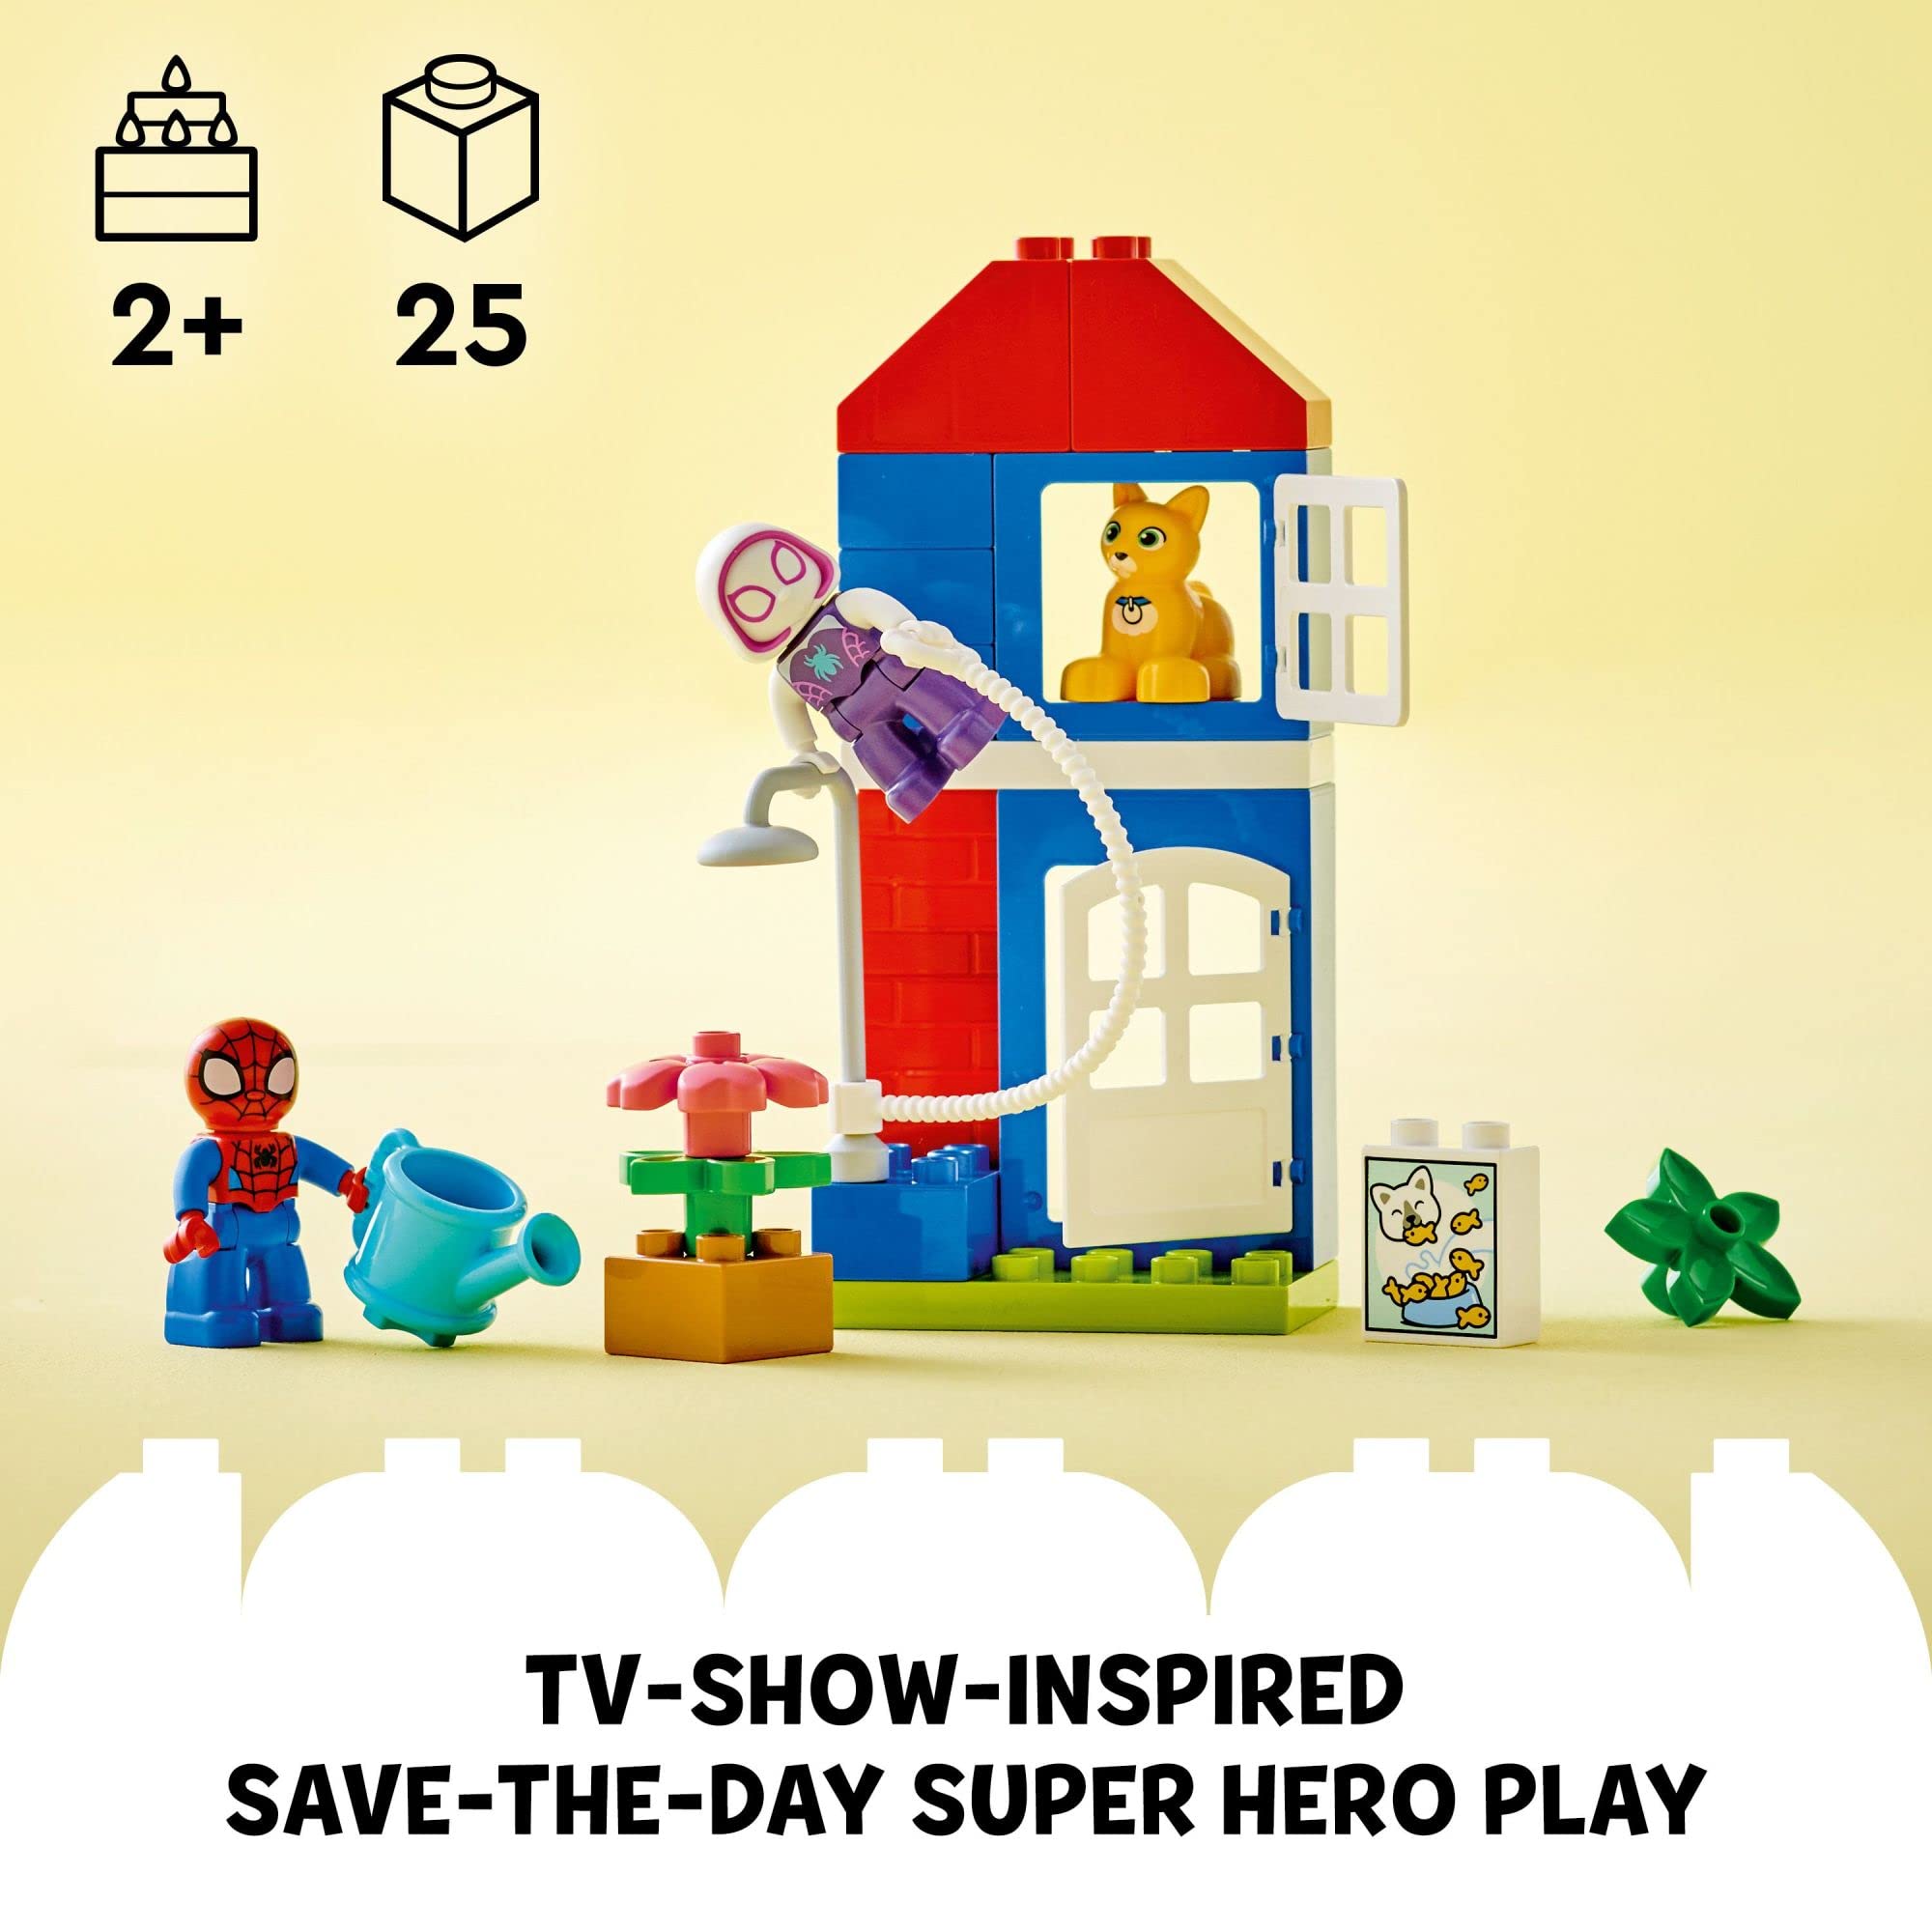 LEGO DUPLO Marvel Spider-Man’s House 10995, Spiderman Toy for Toddlers, Boys, and Girls, Spidey and His Amazing Friends Super Hero Set